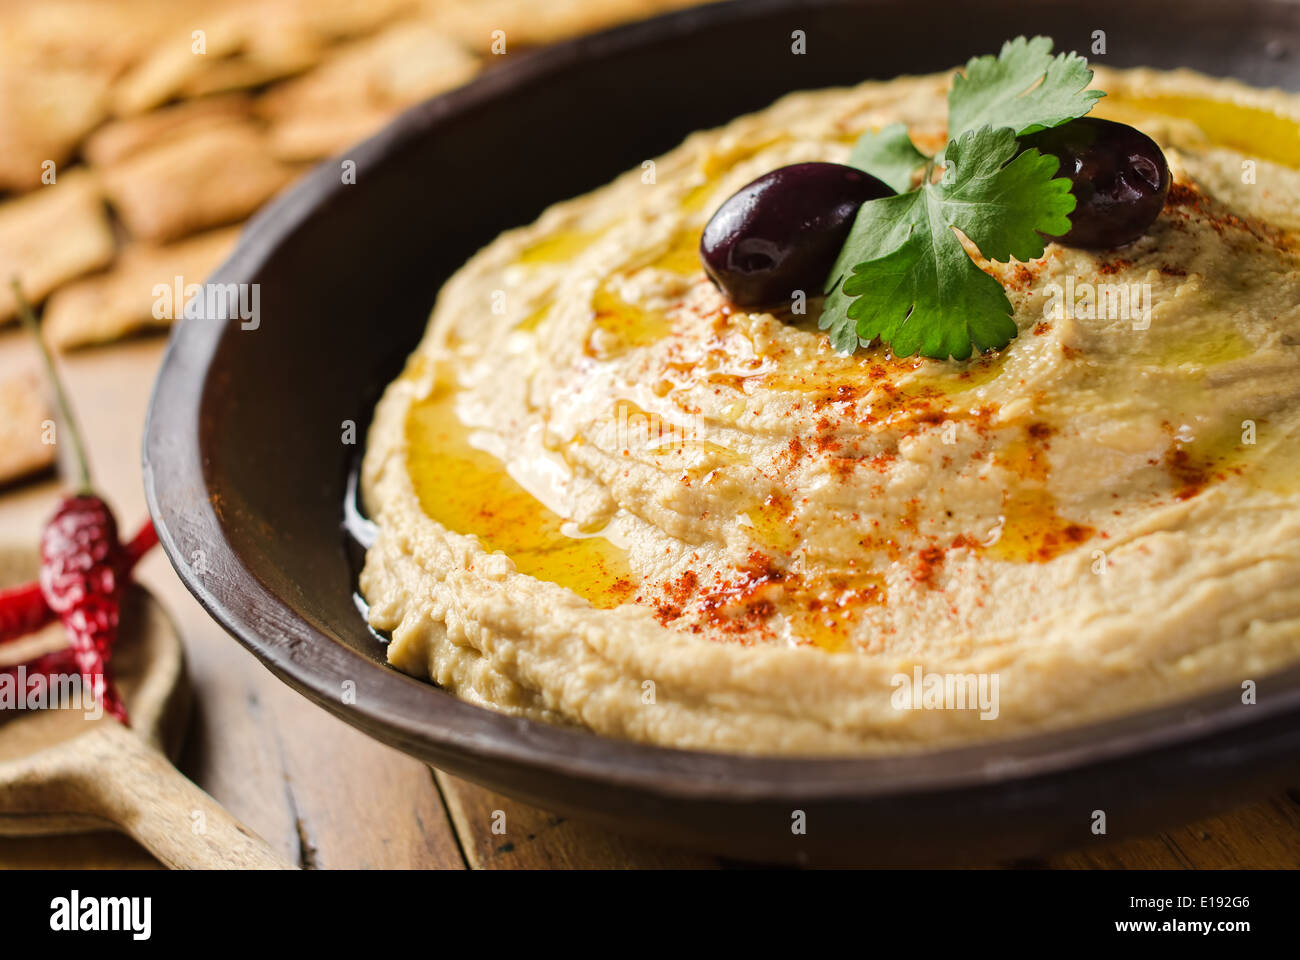 A bowl of creamy hummus with olive oil and pita chips. Stock Photo